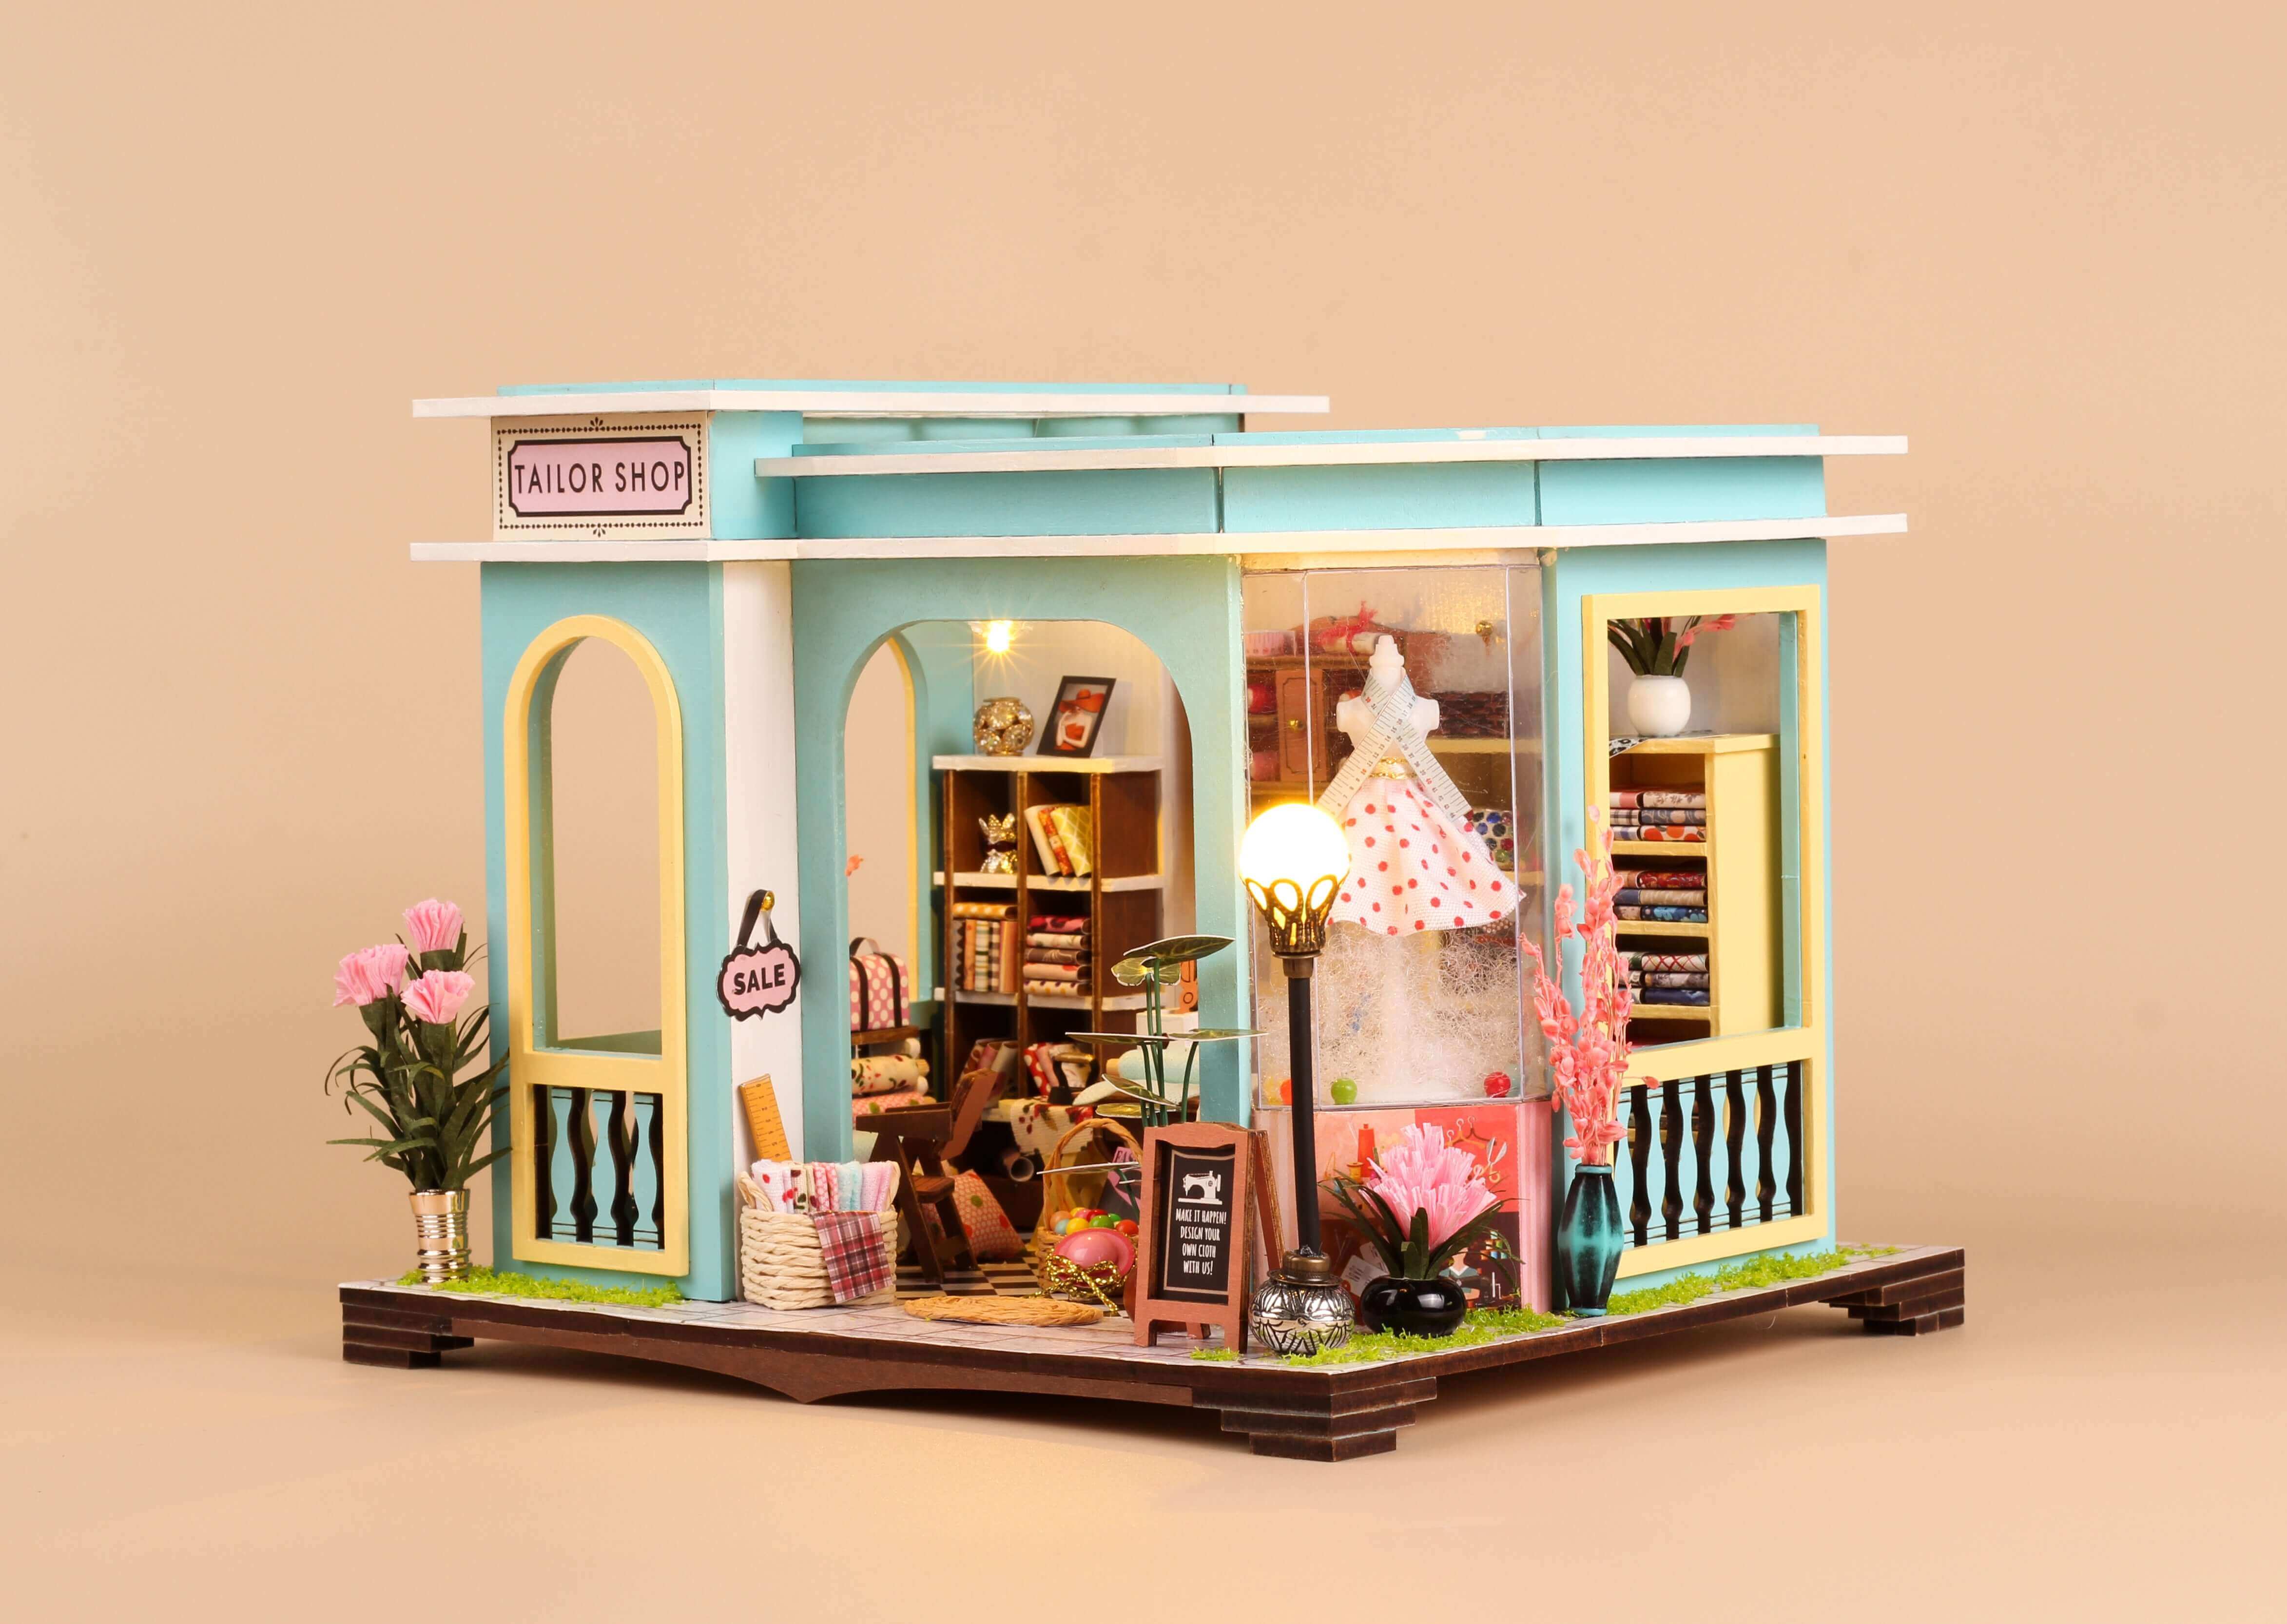 Tailor Shop DIY Miniature Dollhouse Kit with detailed interior showcasing sewing supplies and decor